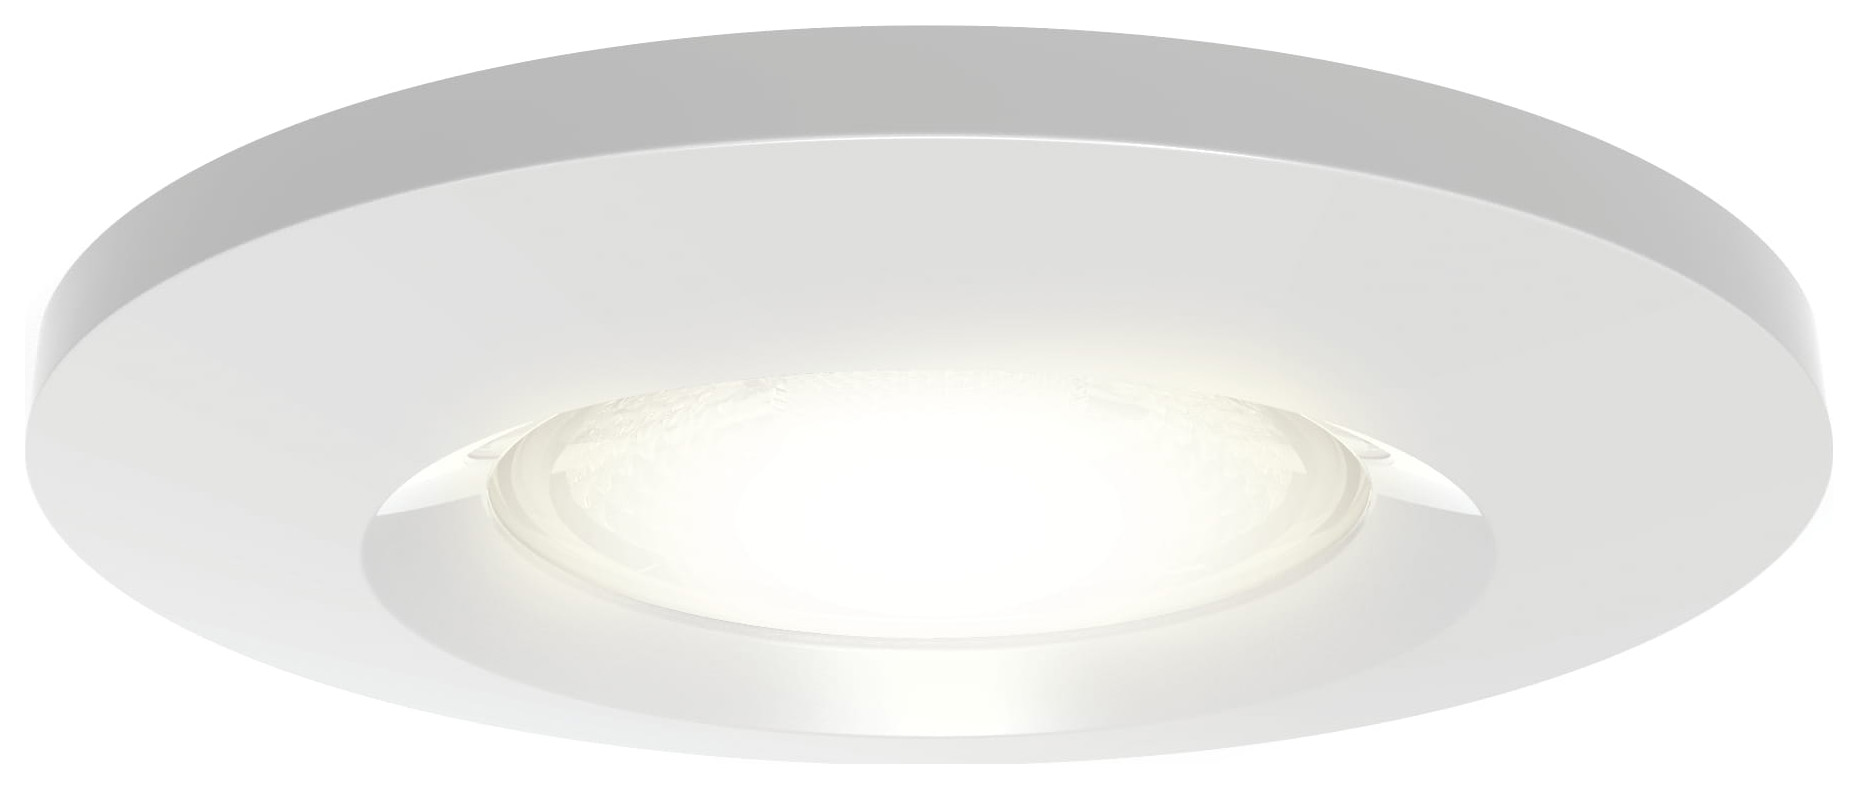 Image of 4Lite IP65 LED 4000K Fire Rated Downlight - Pack of 3